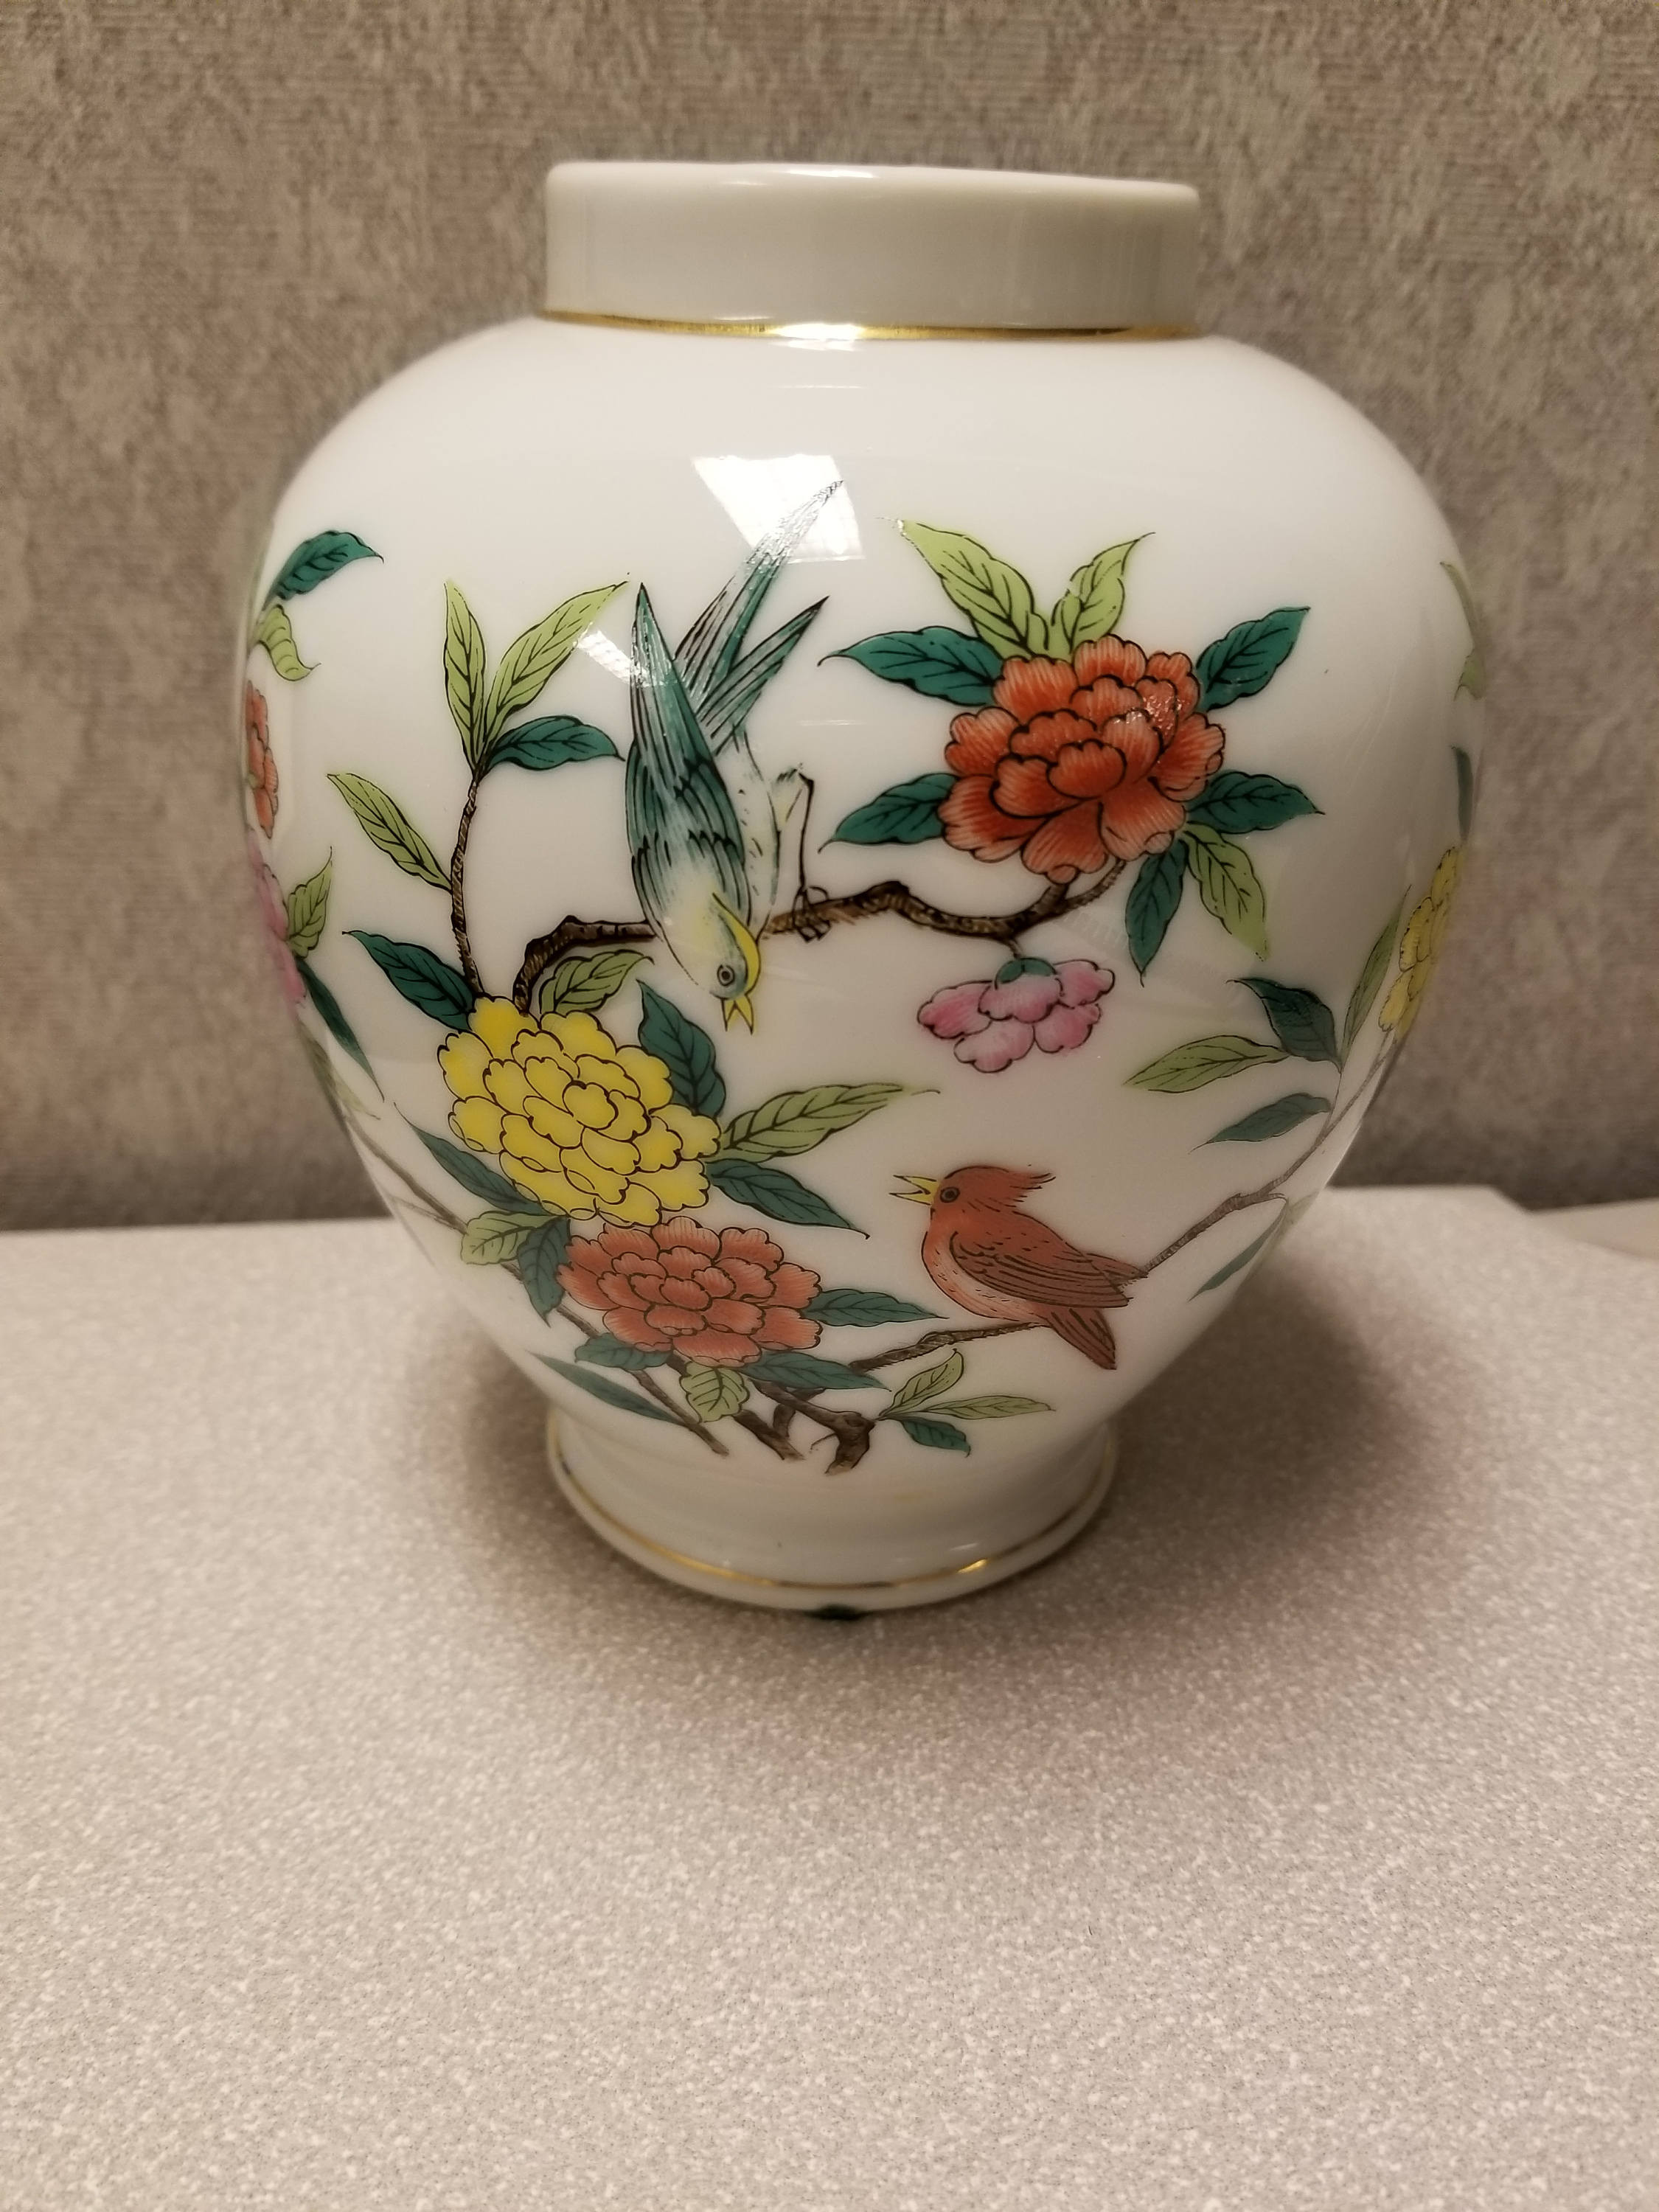 22 Awesome Ceramic Flower Frog Vase 2024 free download ceramic flower frog vase of vintage japanese porcelain vase hand painted etsy within dc29fc294c28ezoom